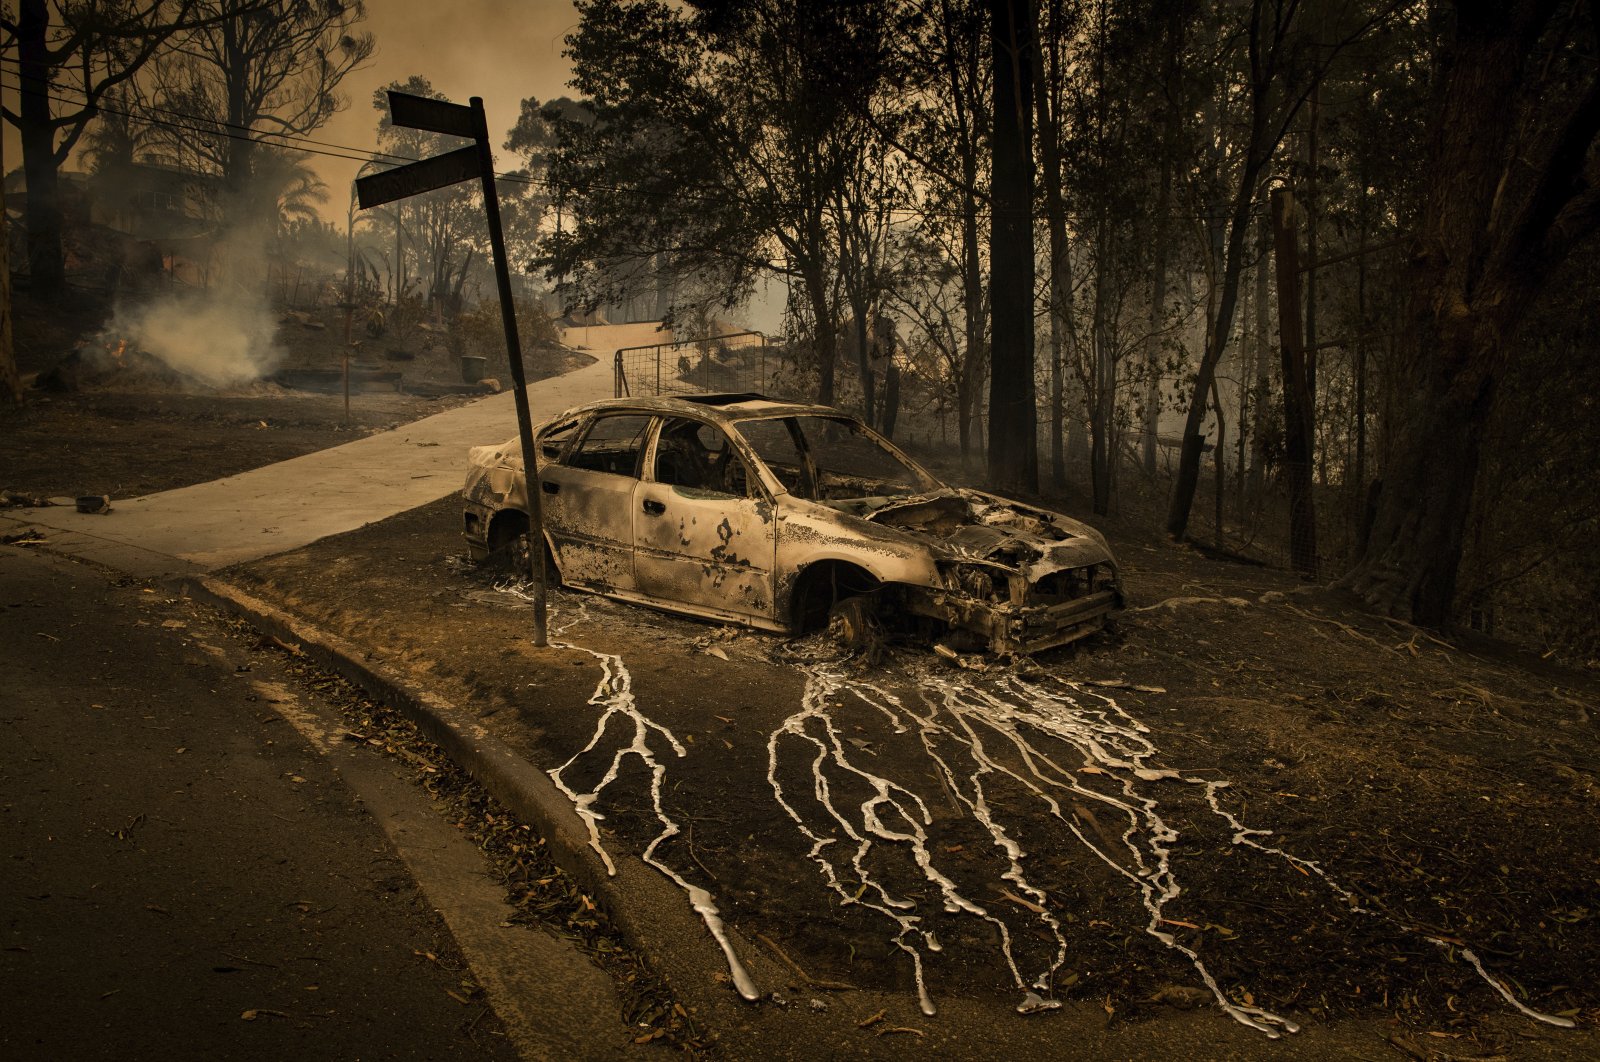 Aluminum, which melts at 660.3 C, has streamed from a burning car in Conjola Park, a town where bushfires razed more than 89 properties, in New South Wales, Australia, Dec. 31, 2019. (Matthew Abbott, Panos Pictures for The New York Times, World Press Photo via AP)